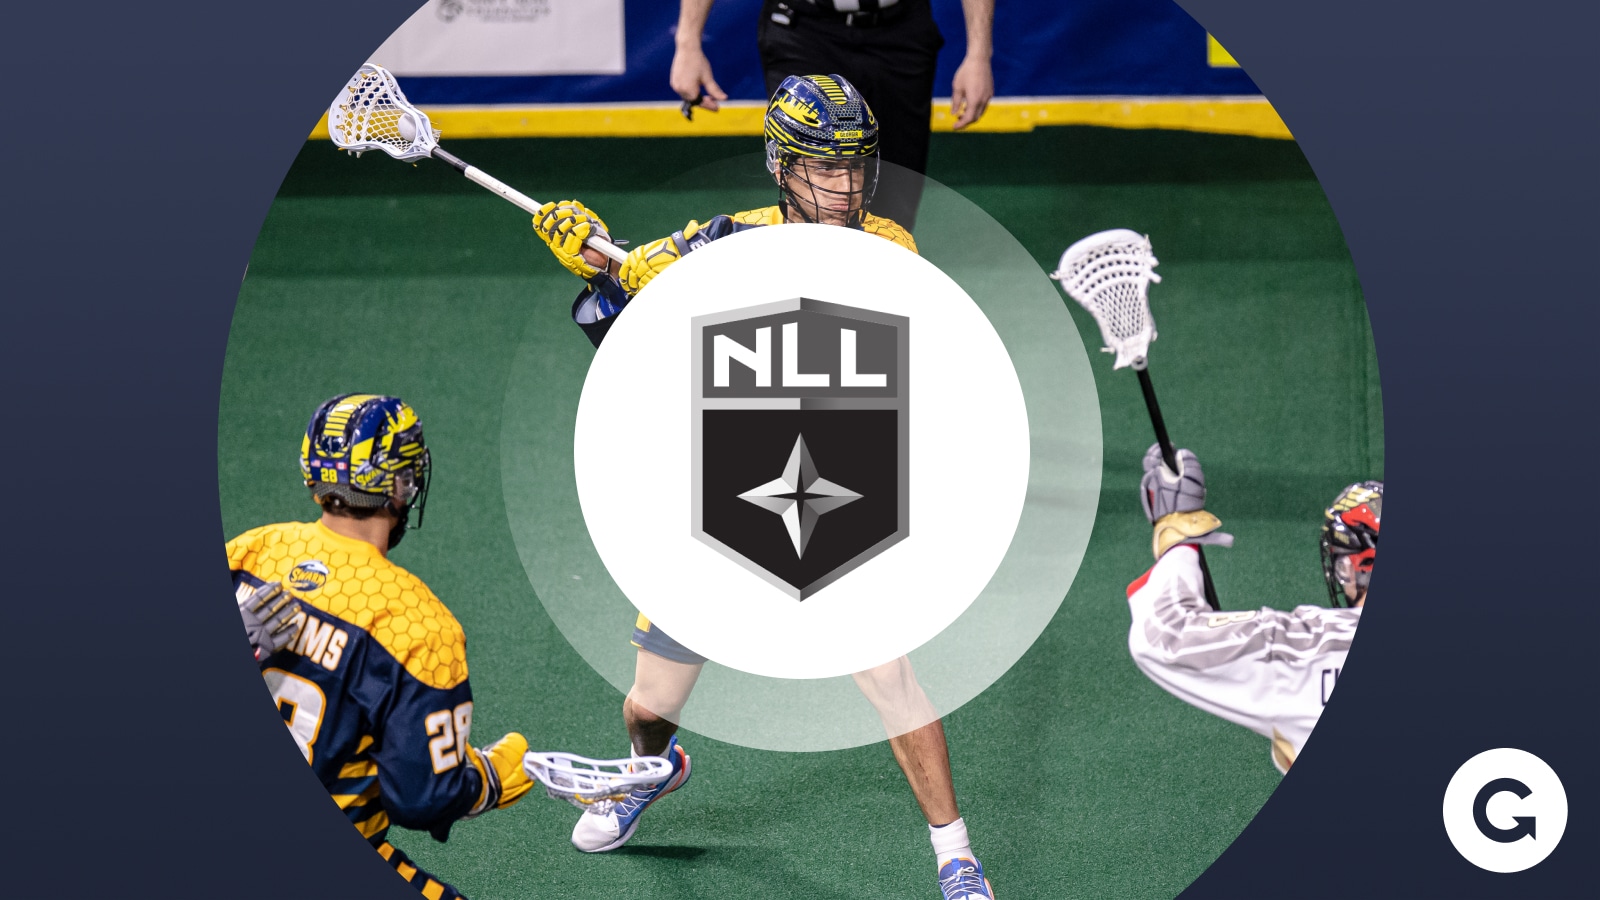 Grabyo Extends Multi-Year Partnership With National Lacrosse League